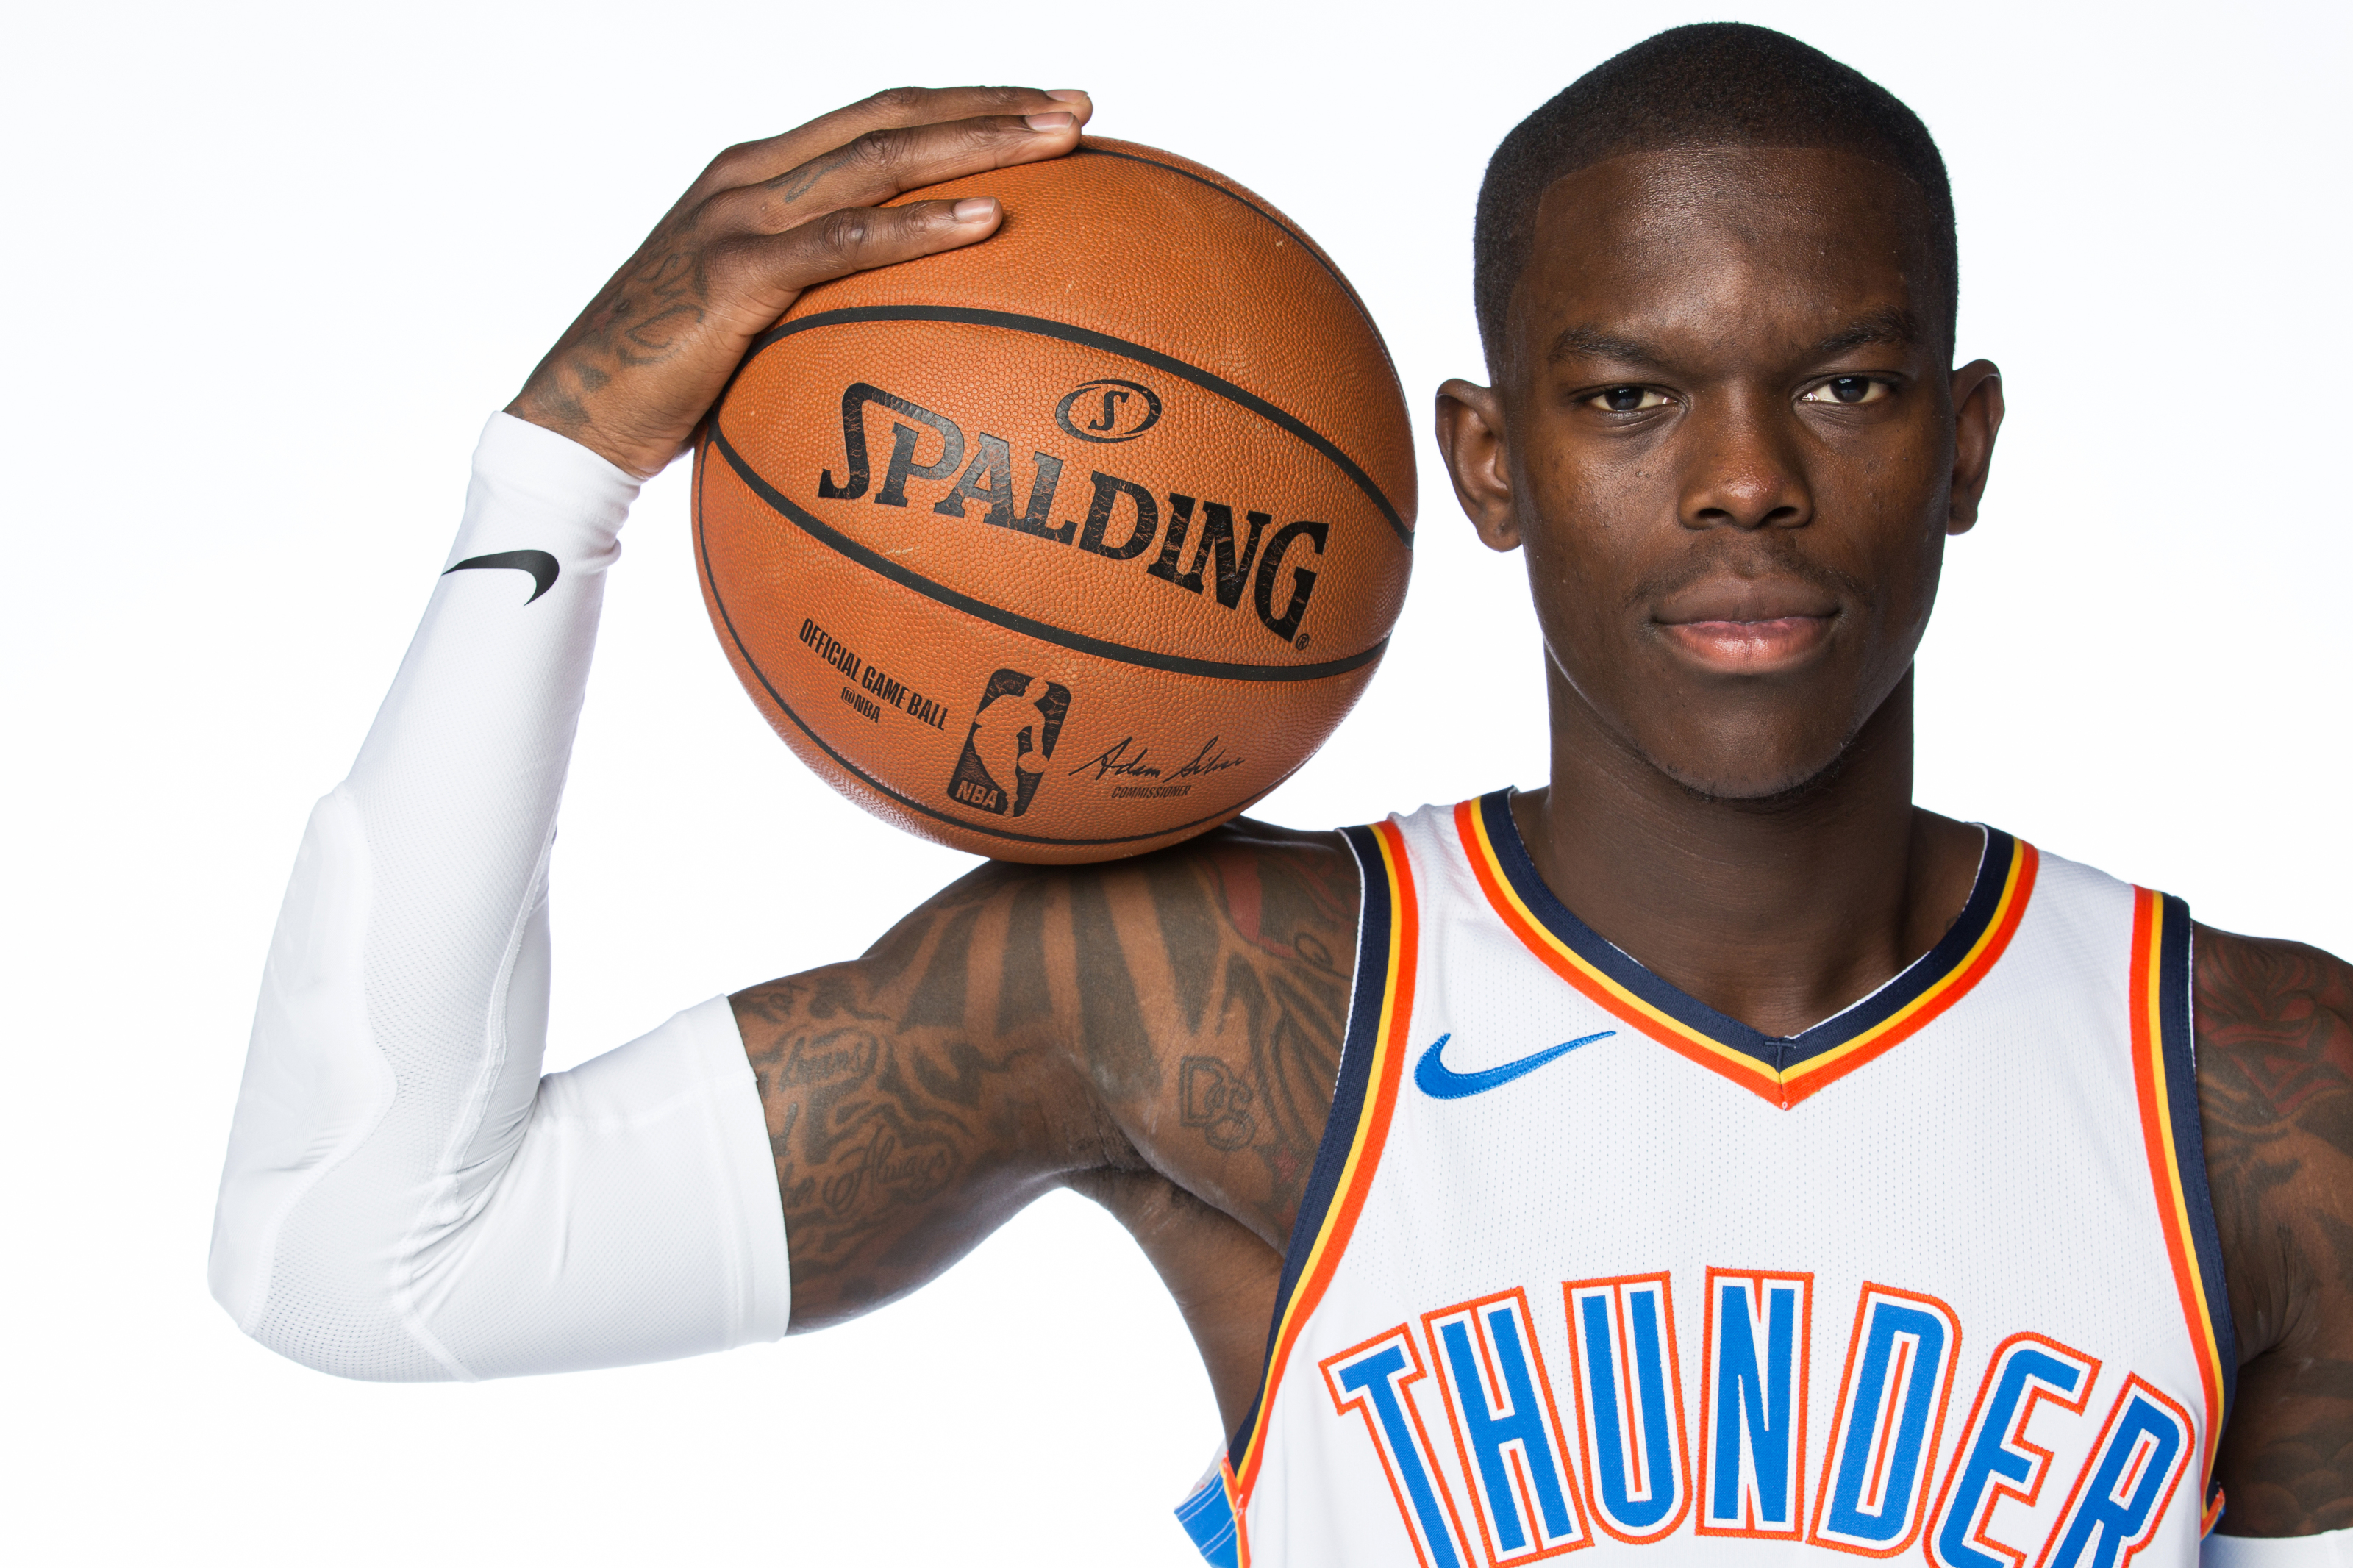 Thunder's Dennis Schroder fined for contact with game official